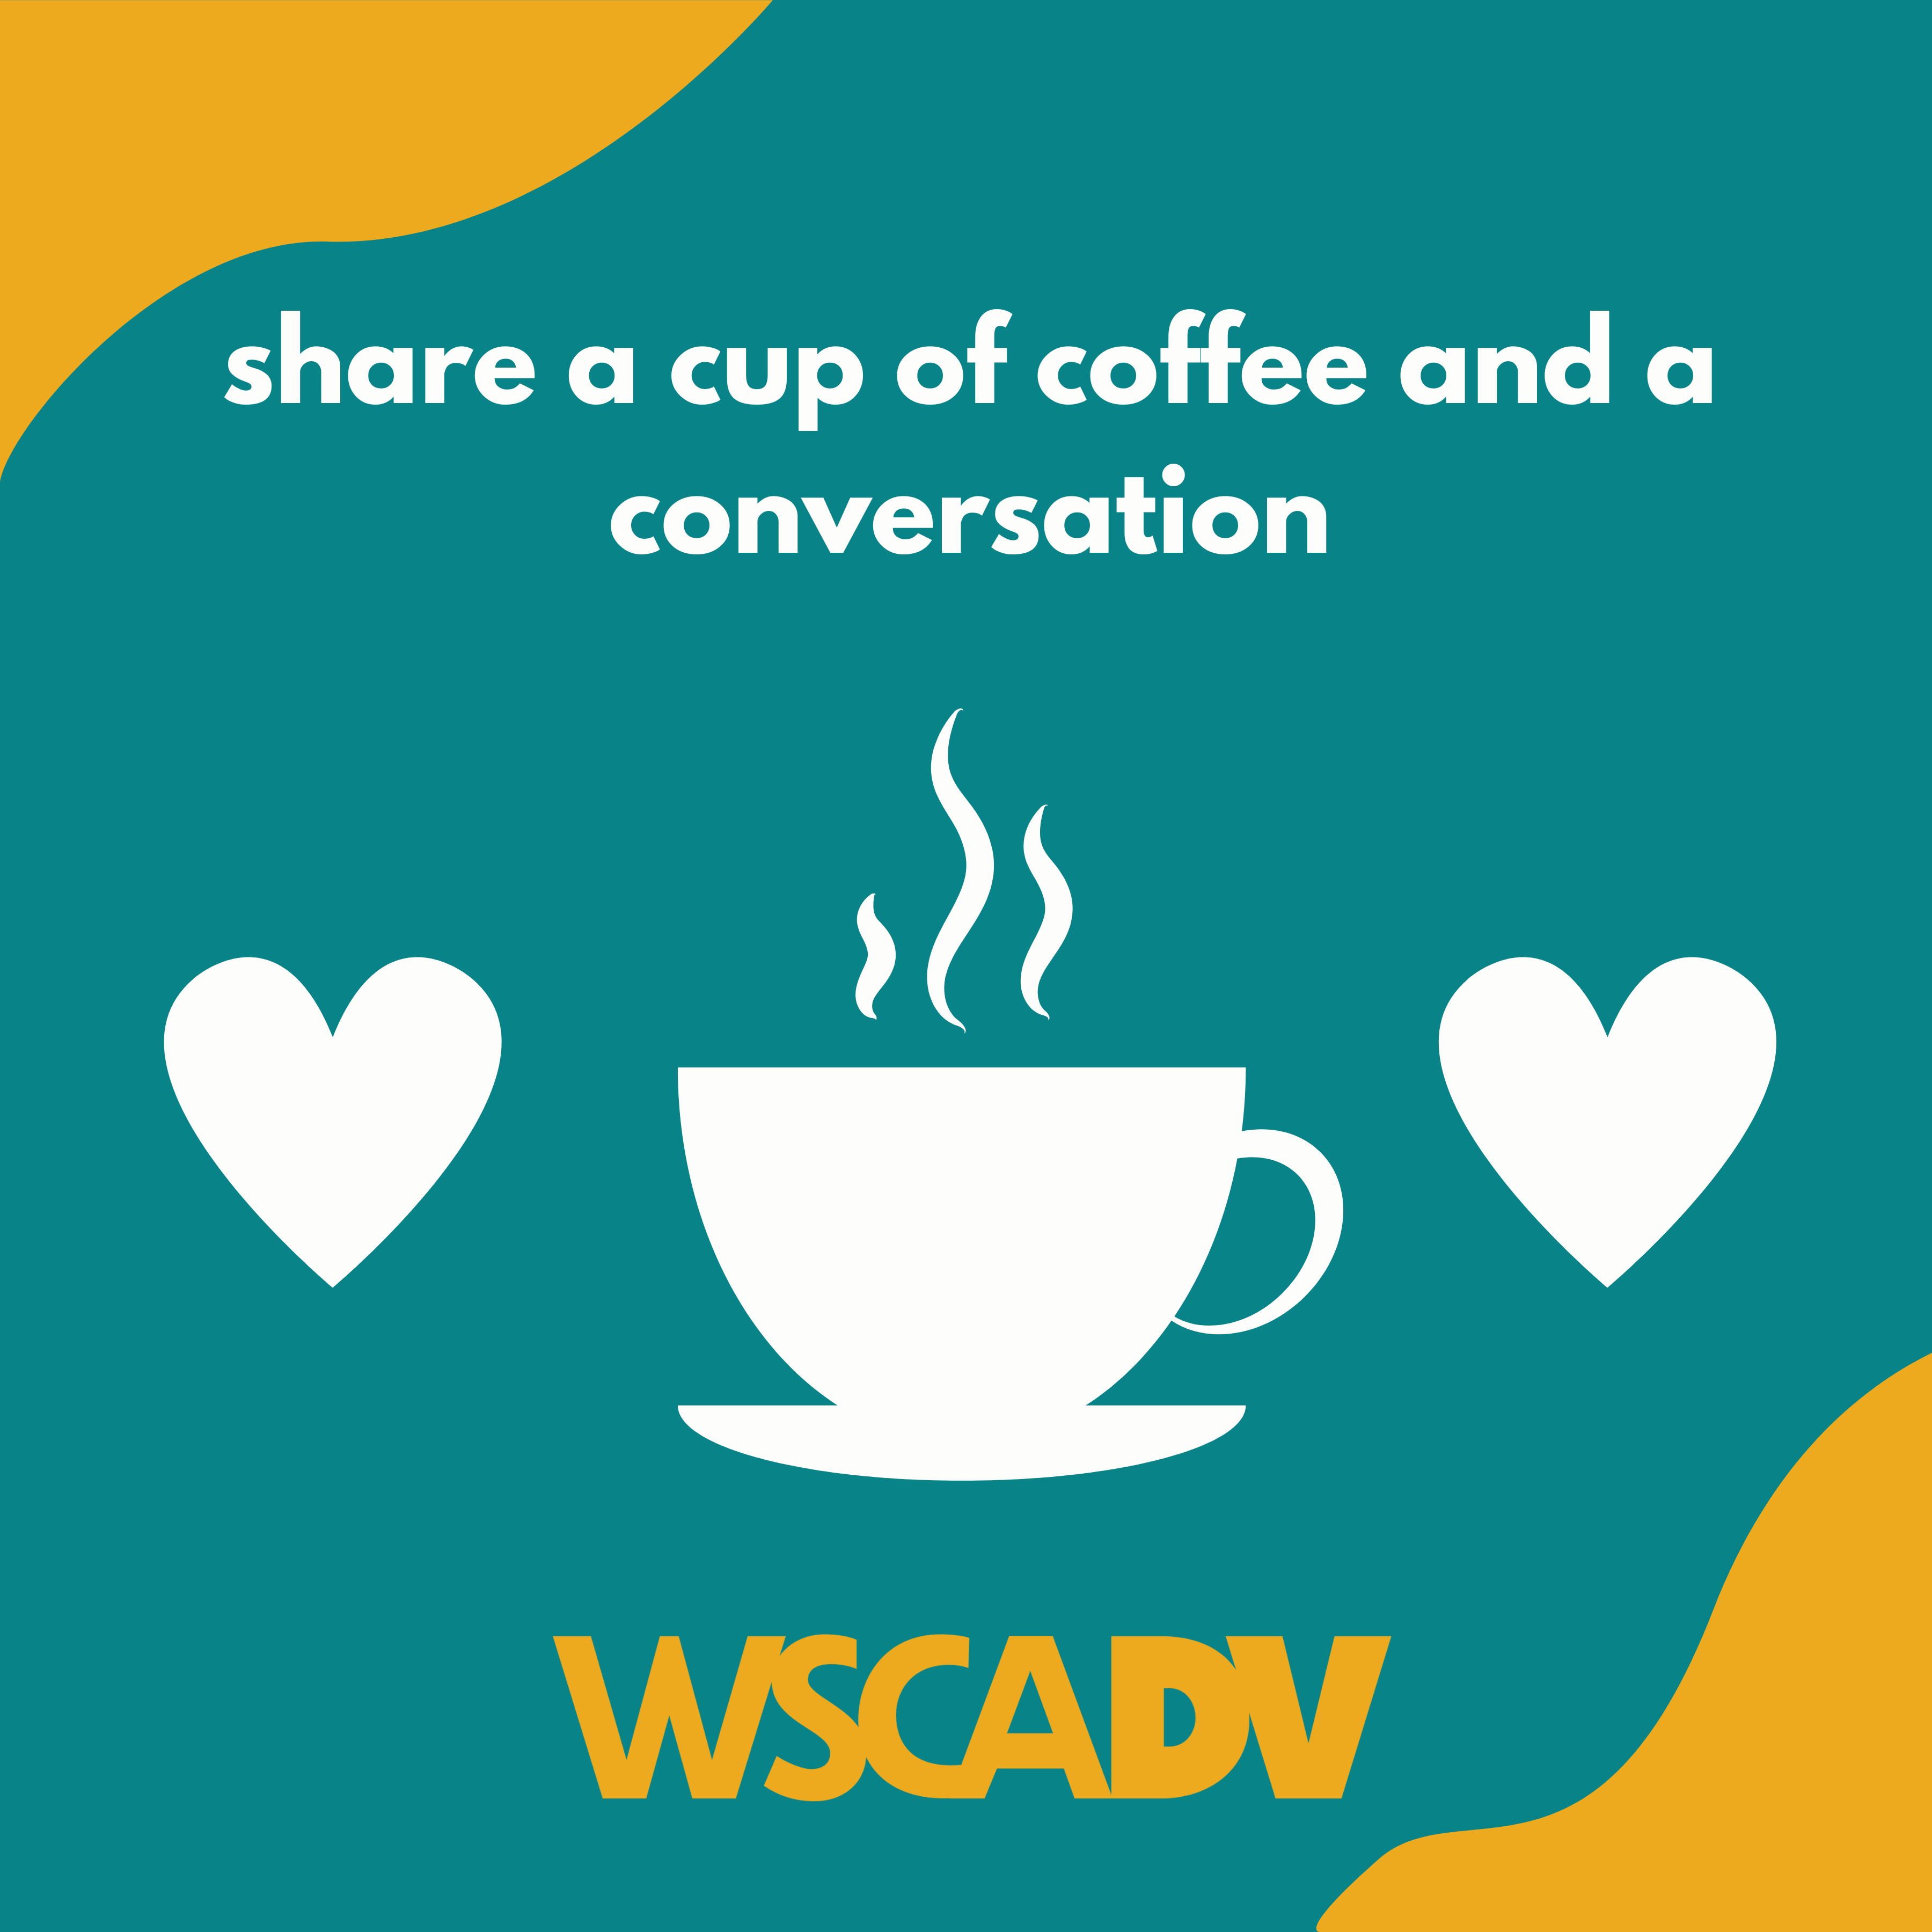 share a cup of coffee and a conversation